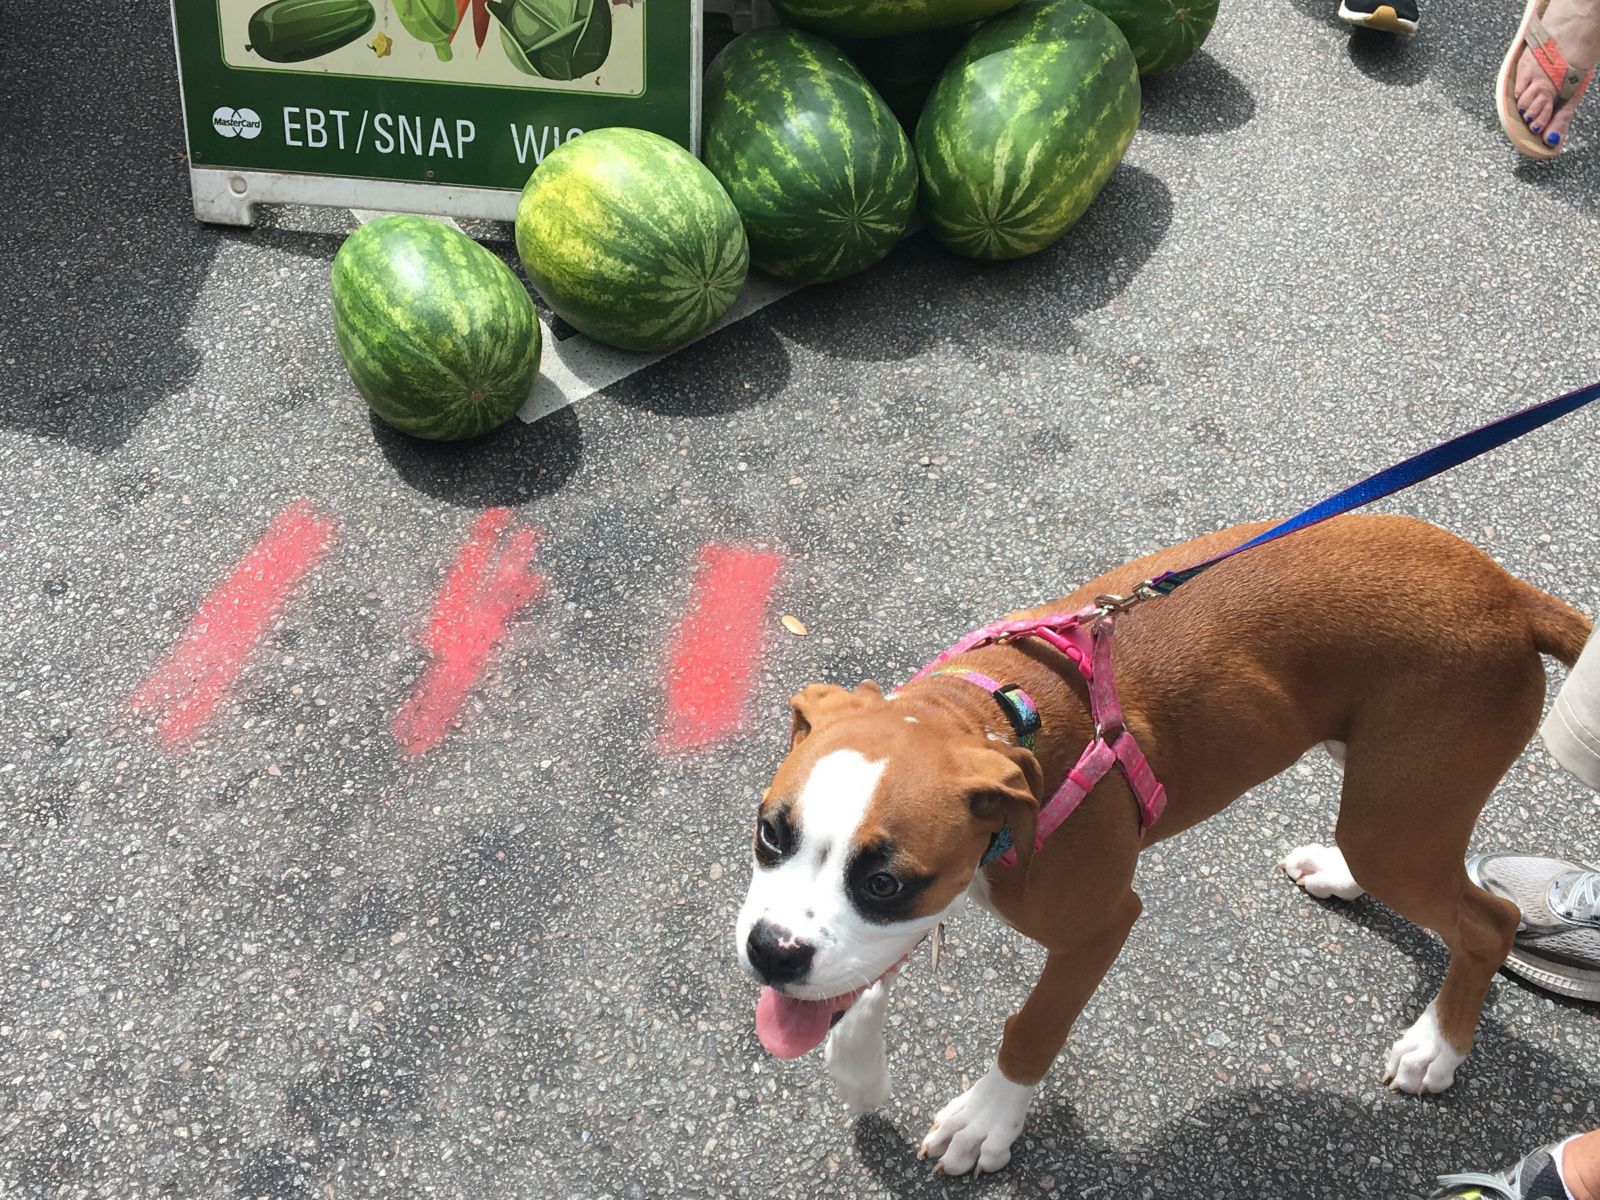 Fresh fruit and cute dogs are always in plentiful supply at Soda City. (Photo/Melinda Waldrop)